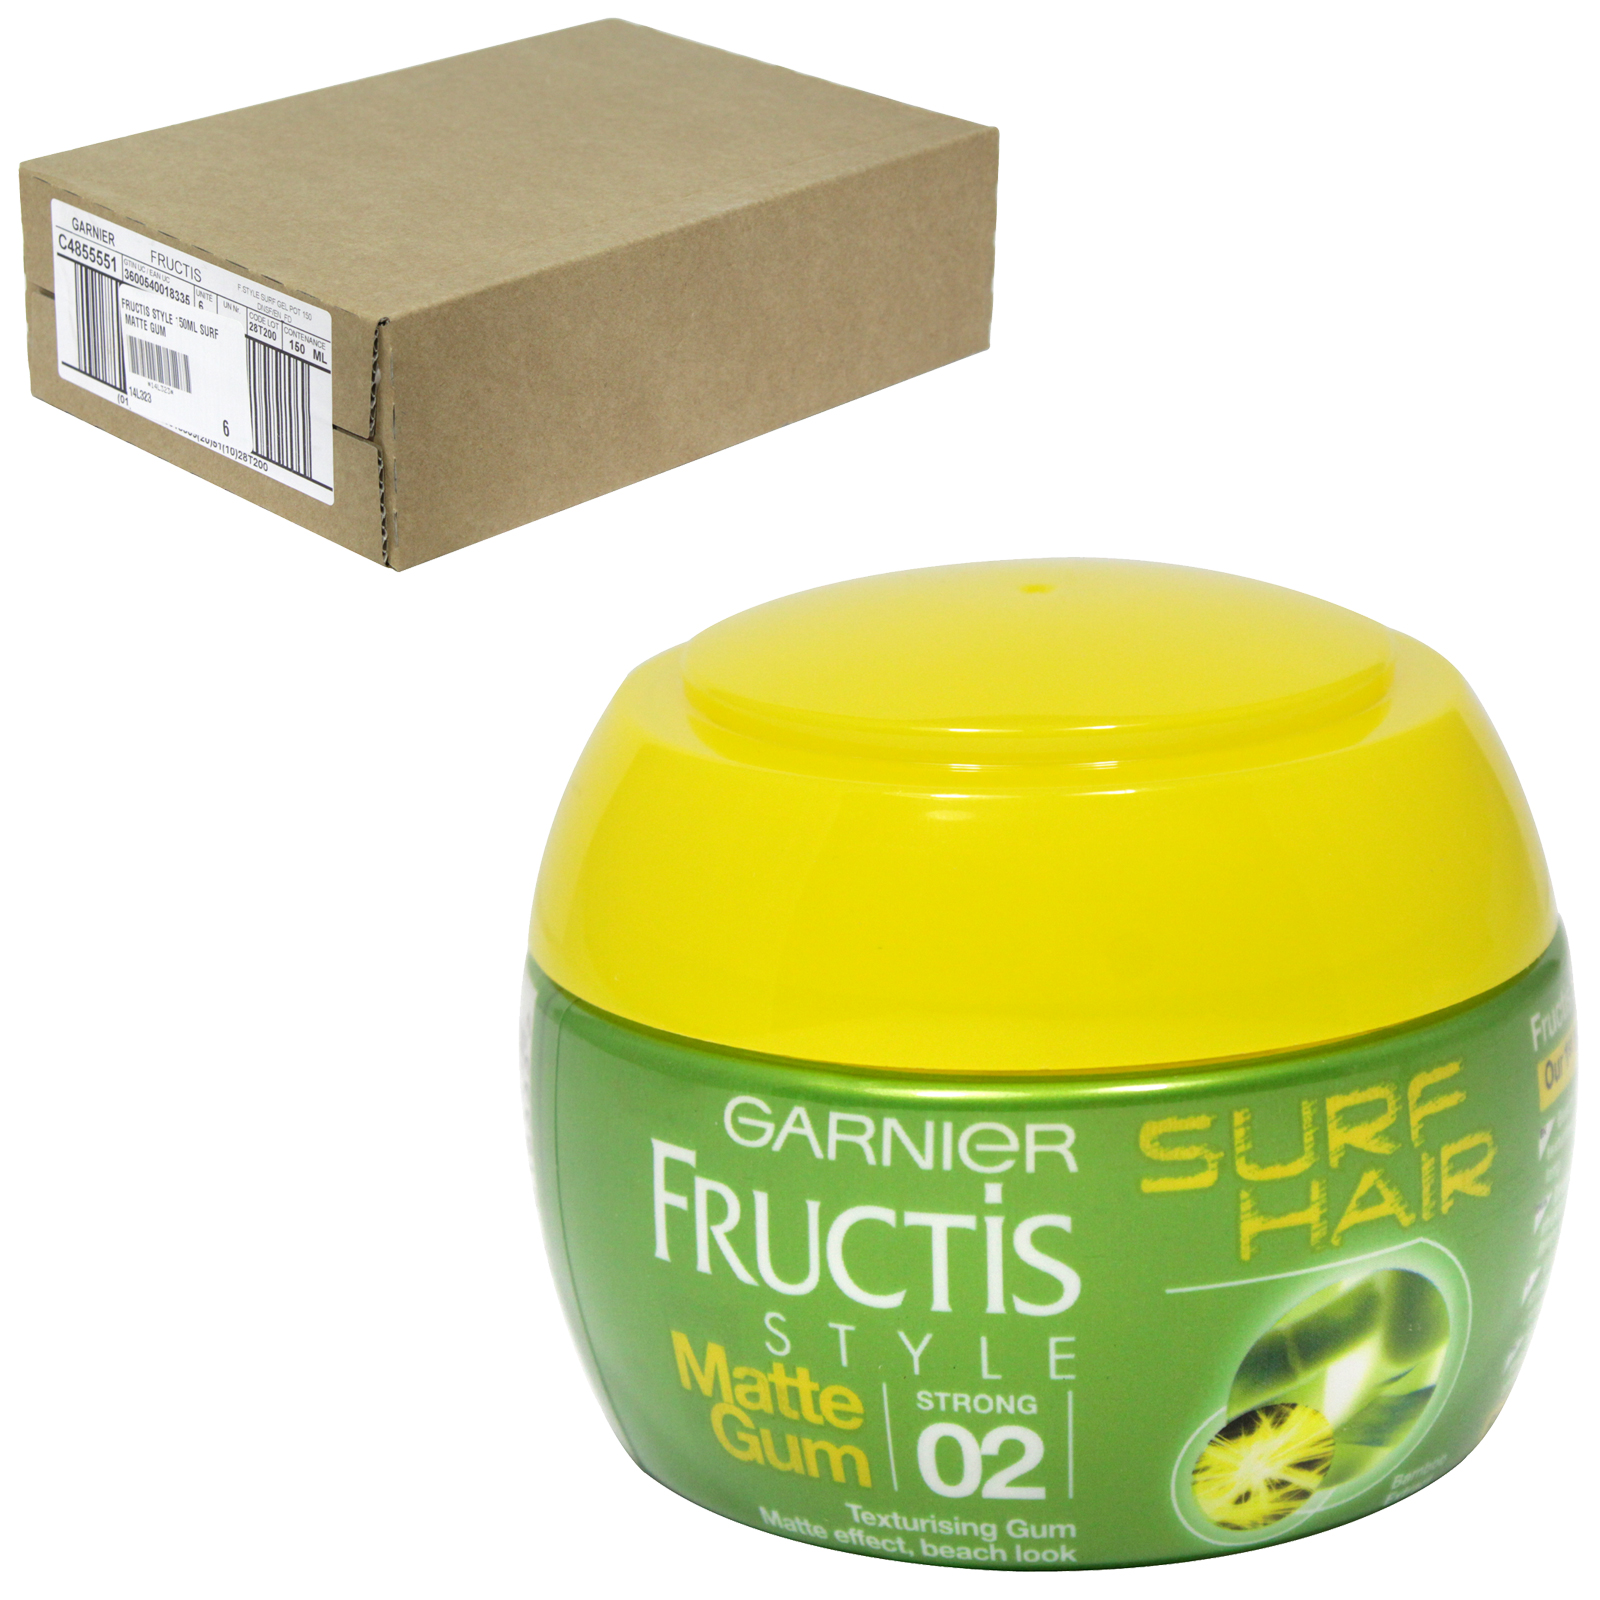 Garnier Fructis Surf Hair Strong 02 150ml - Concord Cash and Carry